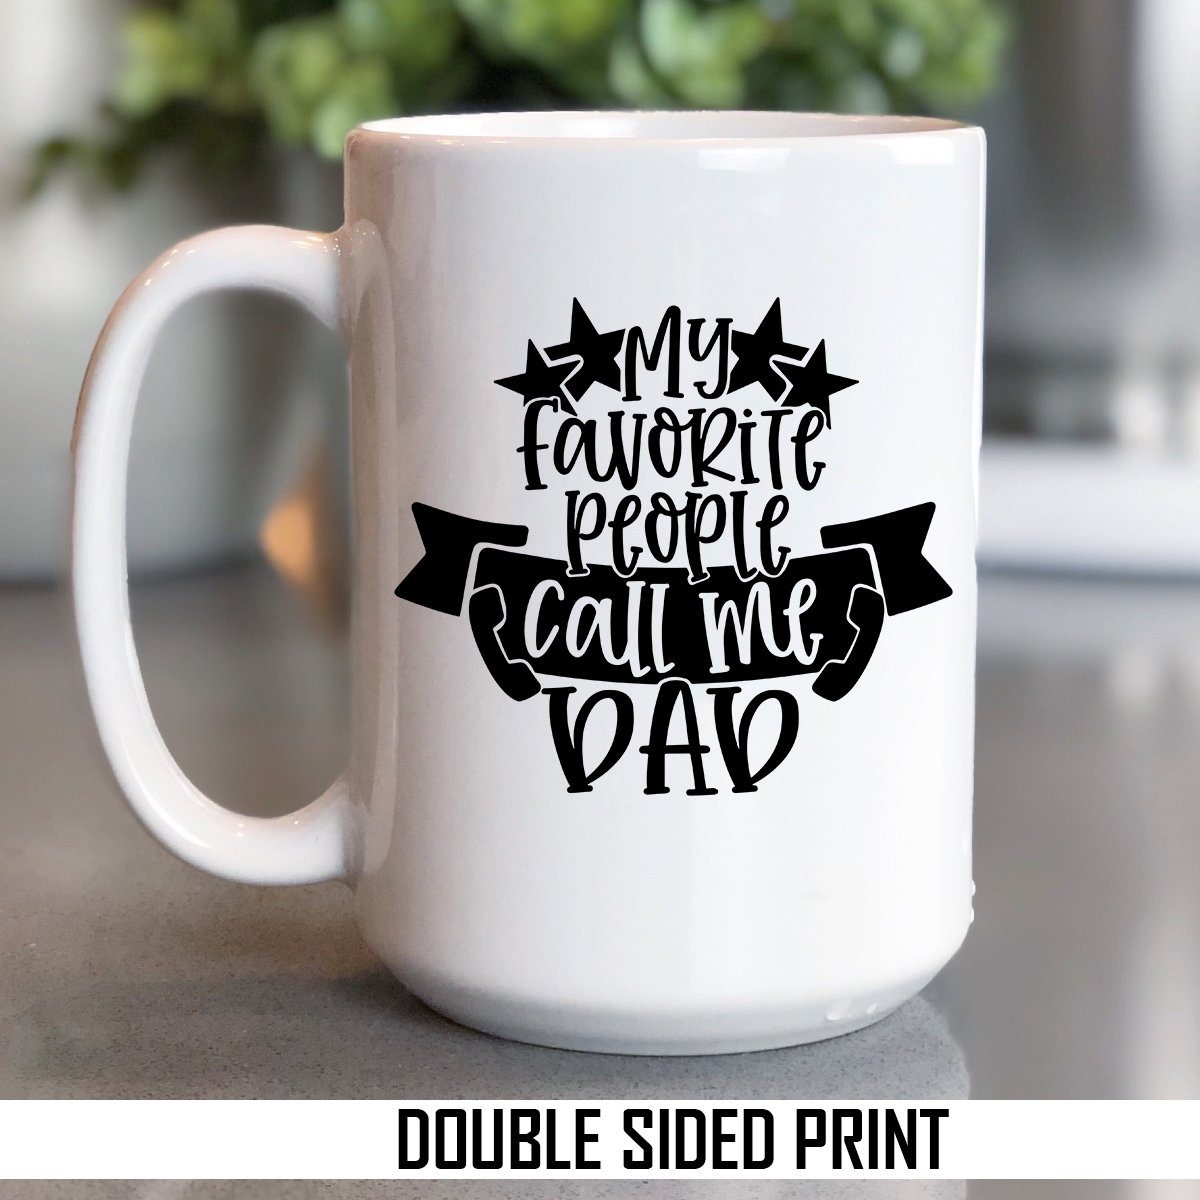 My Favorite People Call Me Dad Double Sided Printed Mug